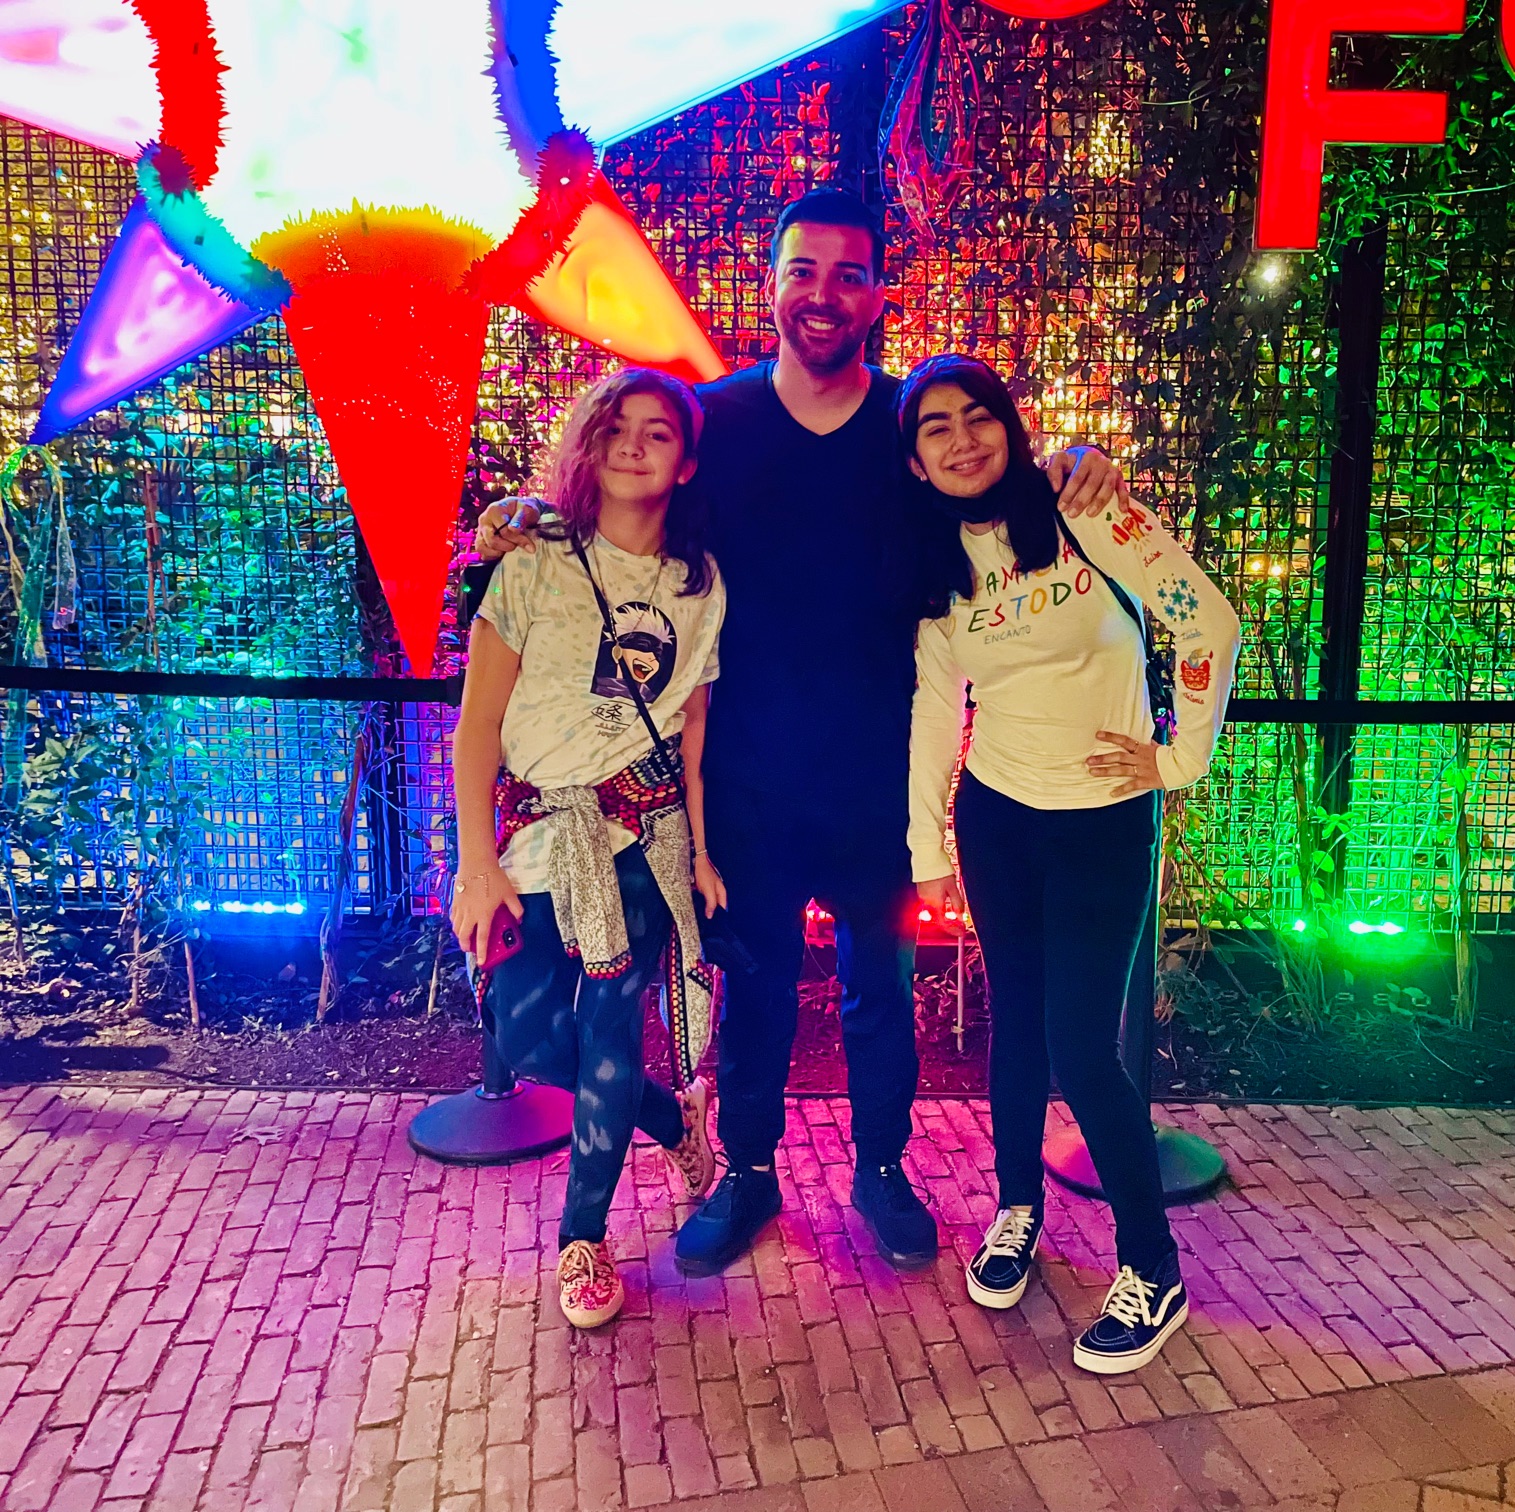 Enrollment Services and Vetting Programs Program Analyst Raul Diaz and his daughters, Alexia and Andrea, in San Antonio’s Pearl District, which features a wide array of restaurants, breweries, galleries and shops. (Photo courtesy of Raul Diaz)